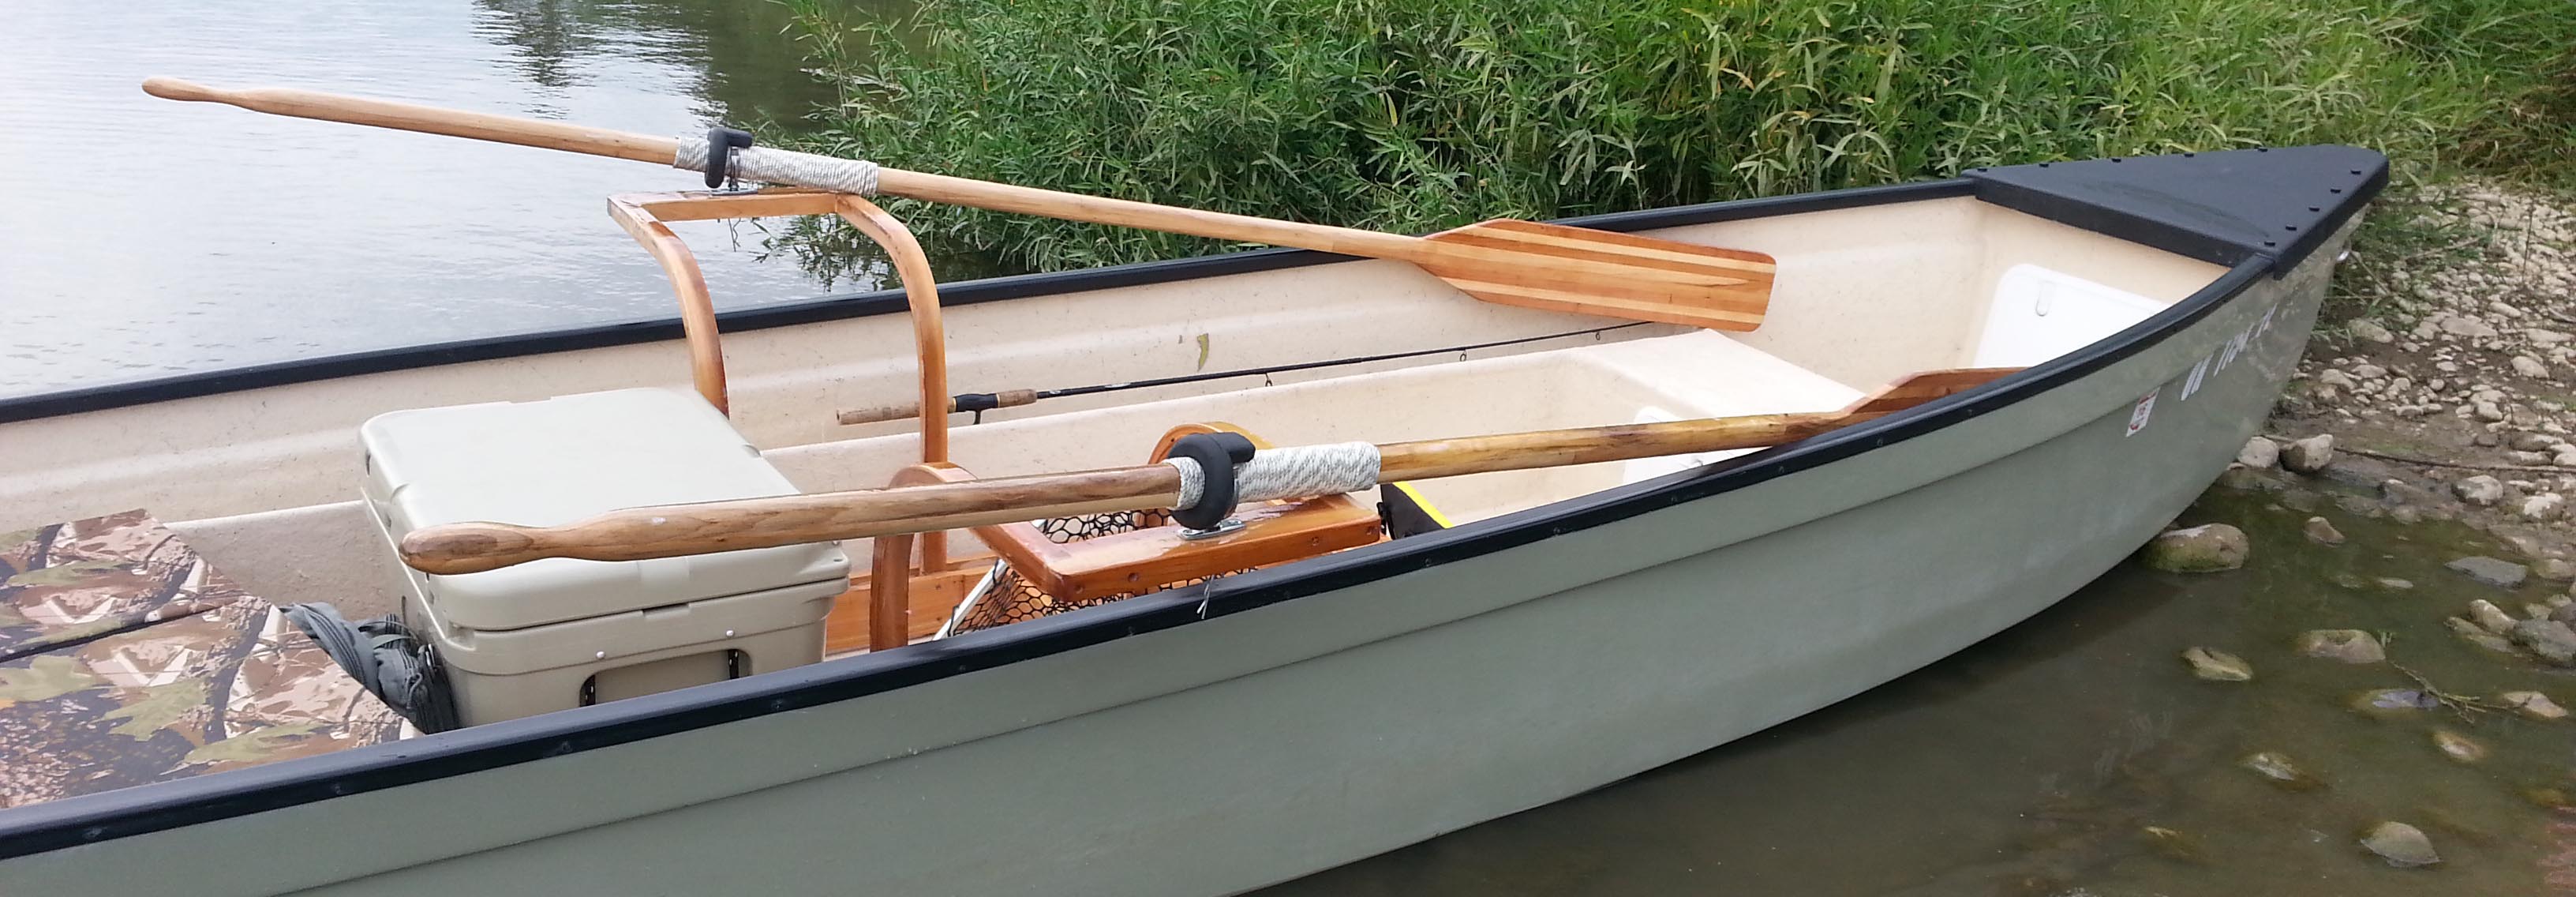 Wooden Boats – The Fiddle and Creel